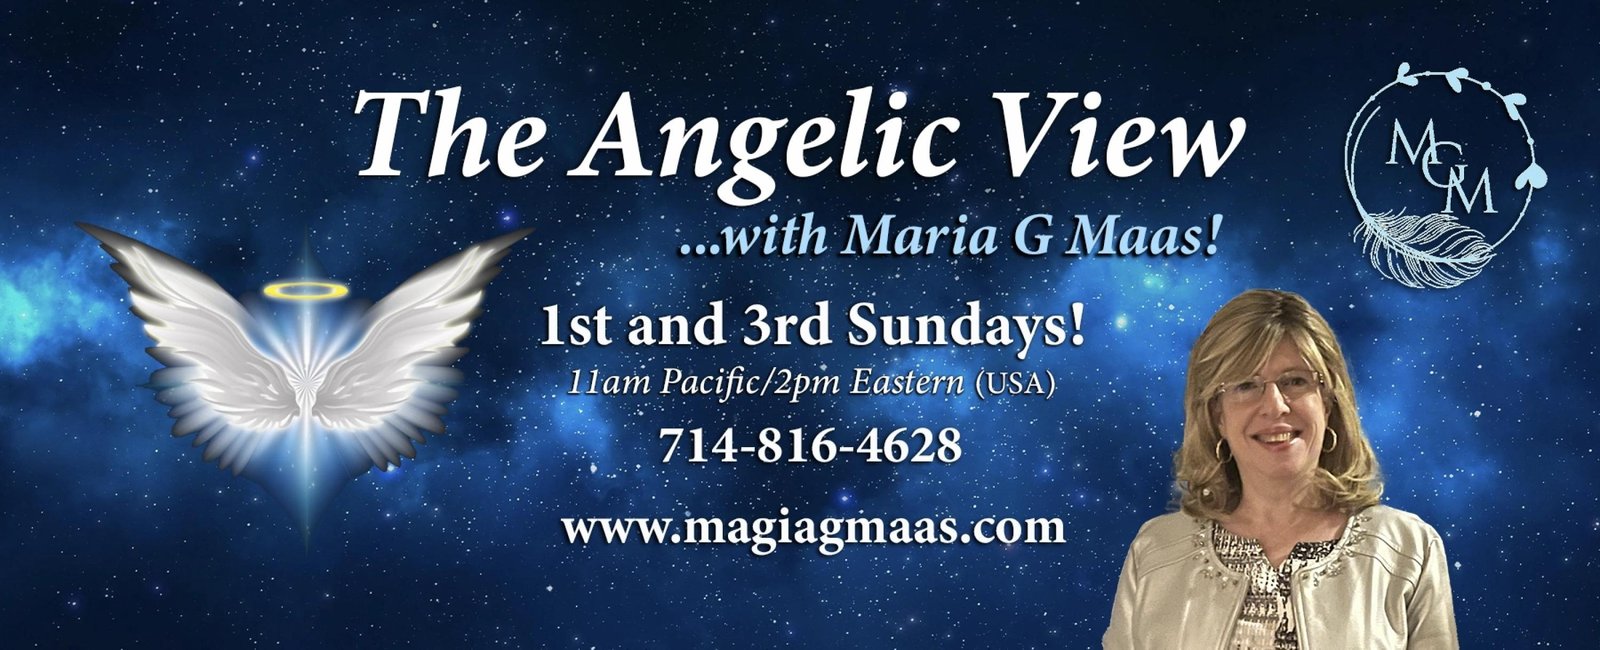 The Angelic View cover photo